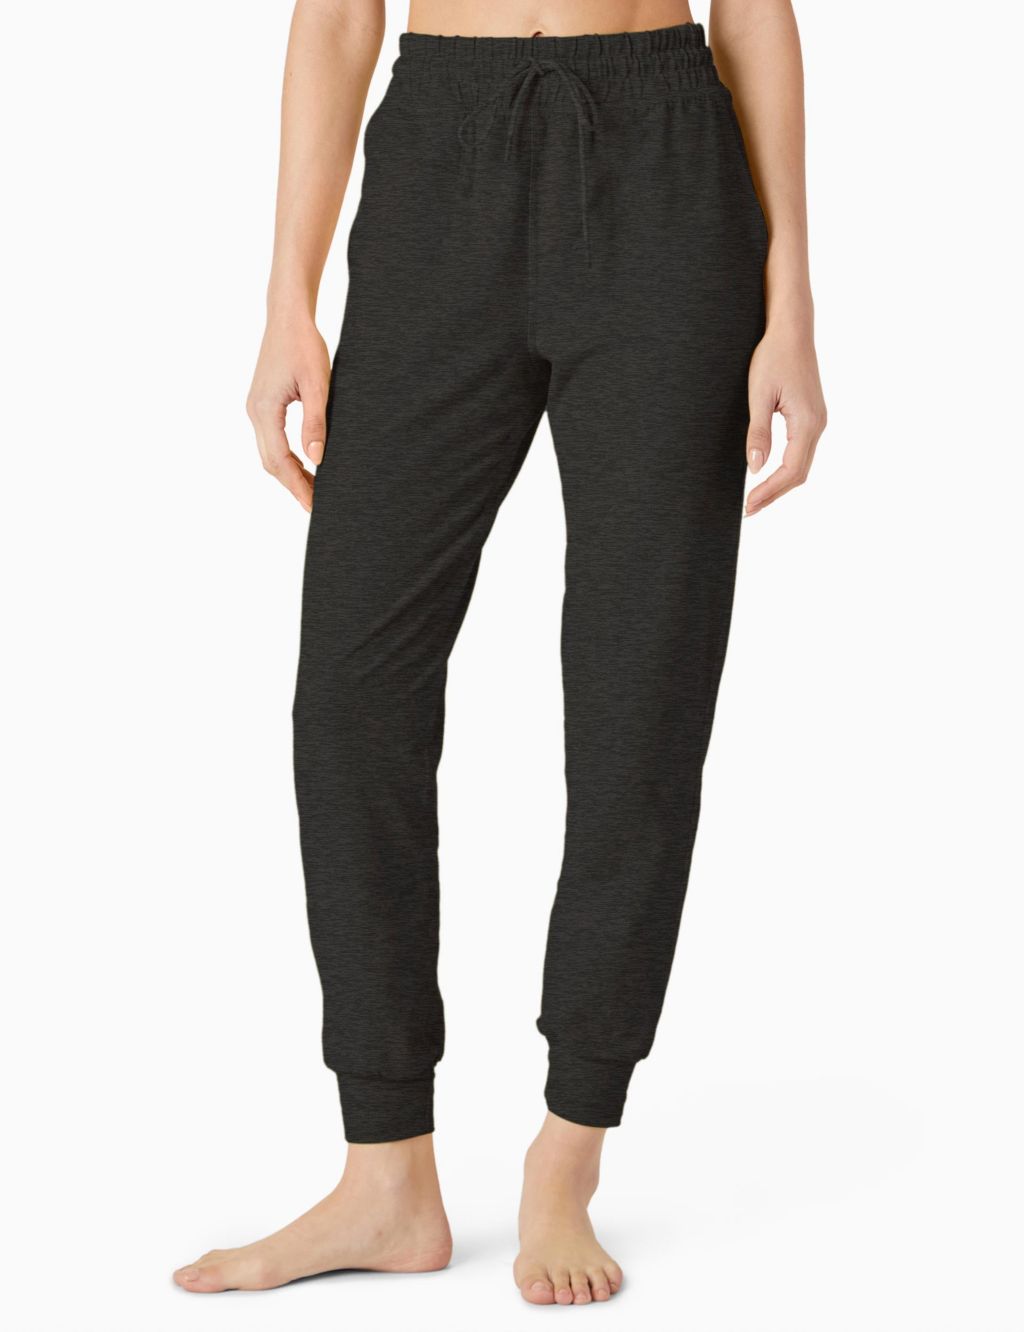 Beyond Yoga Track pants and sweatpants for Women